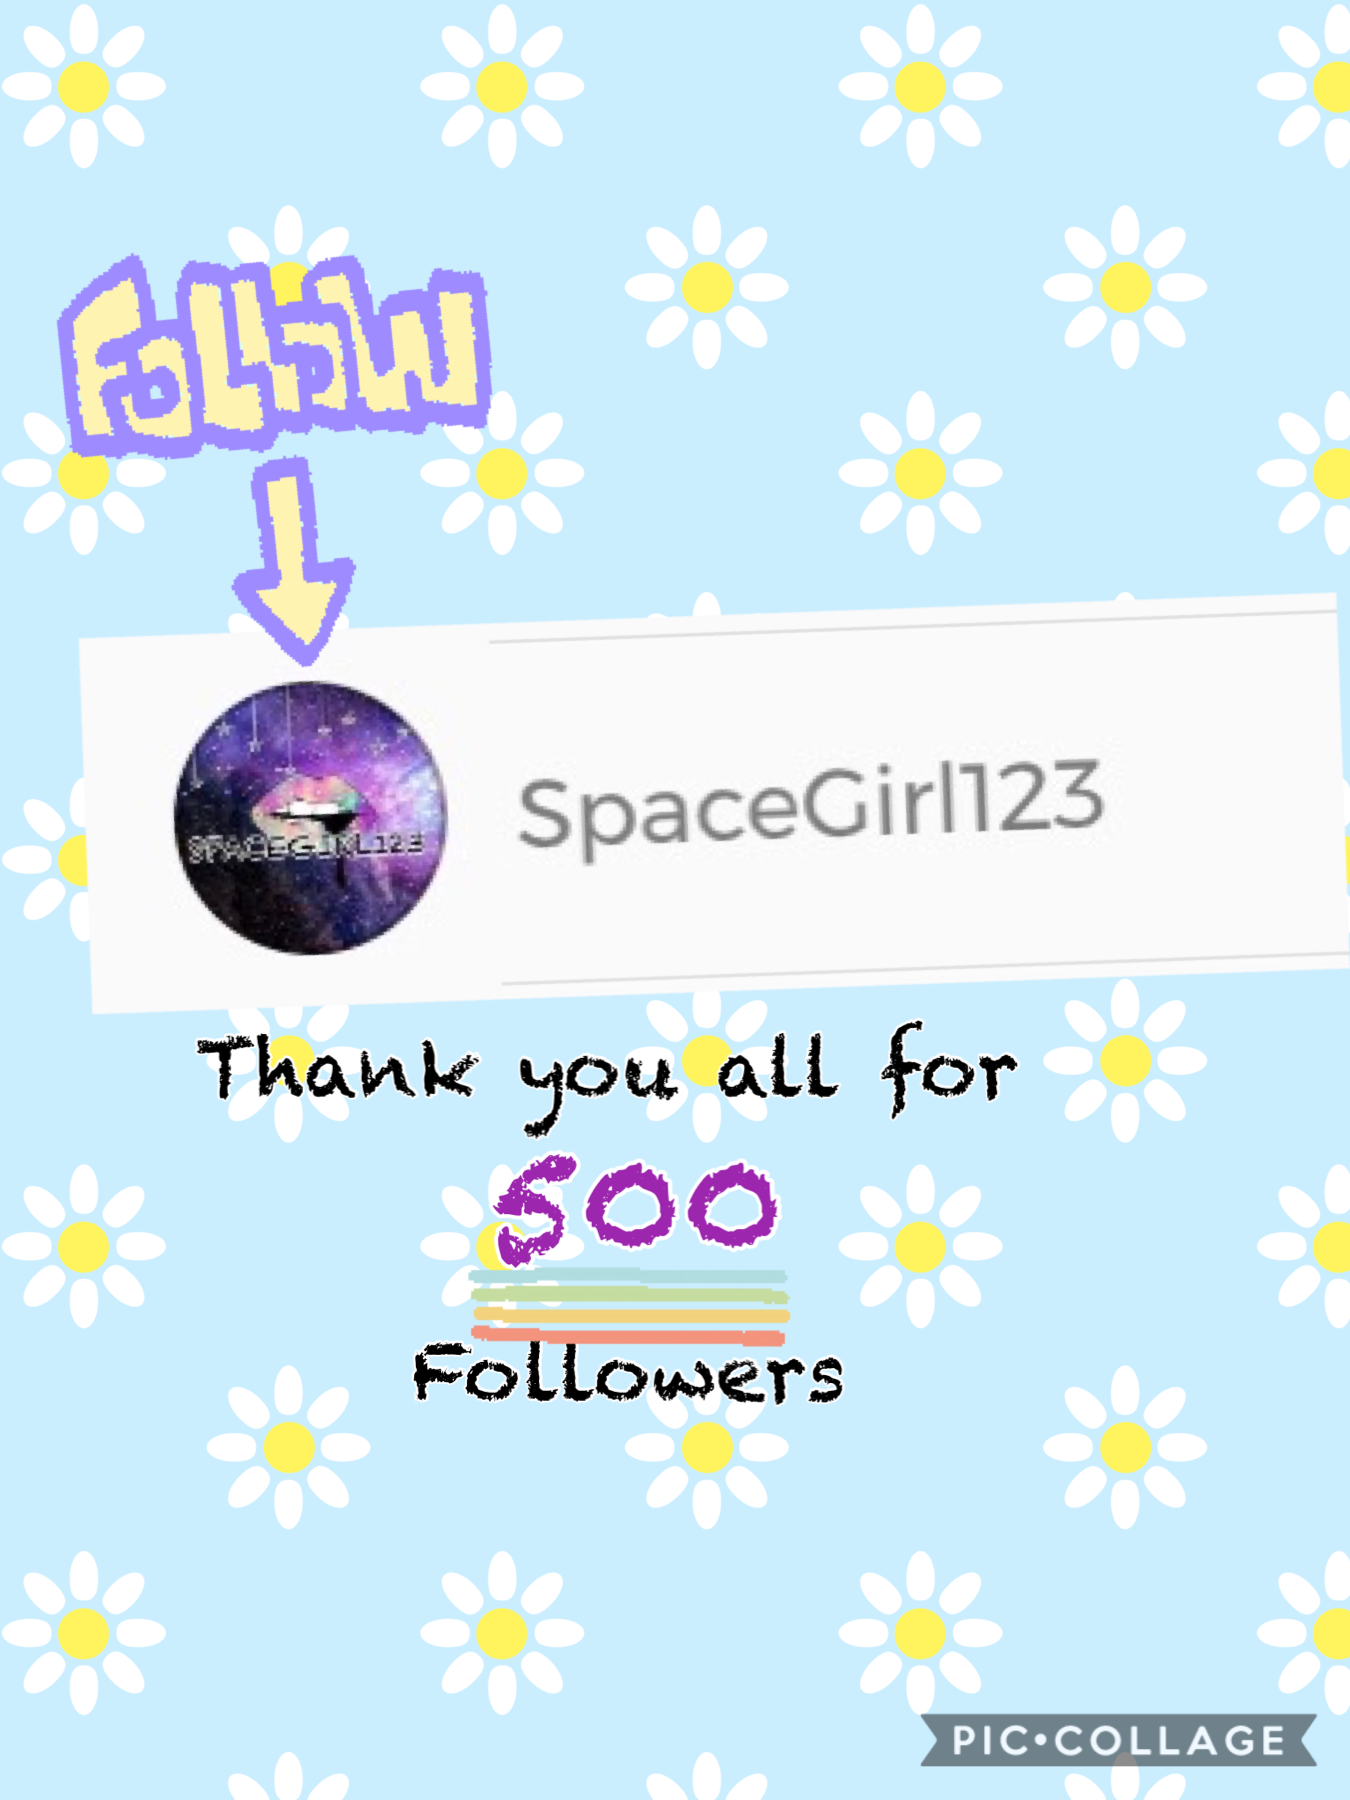 Thank you for 500 followers!!!